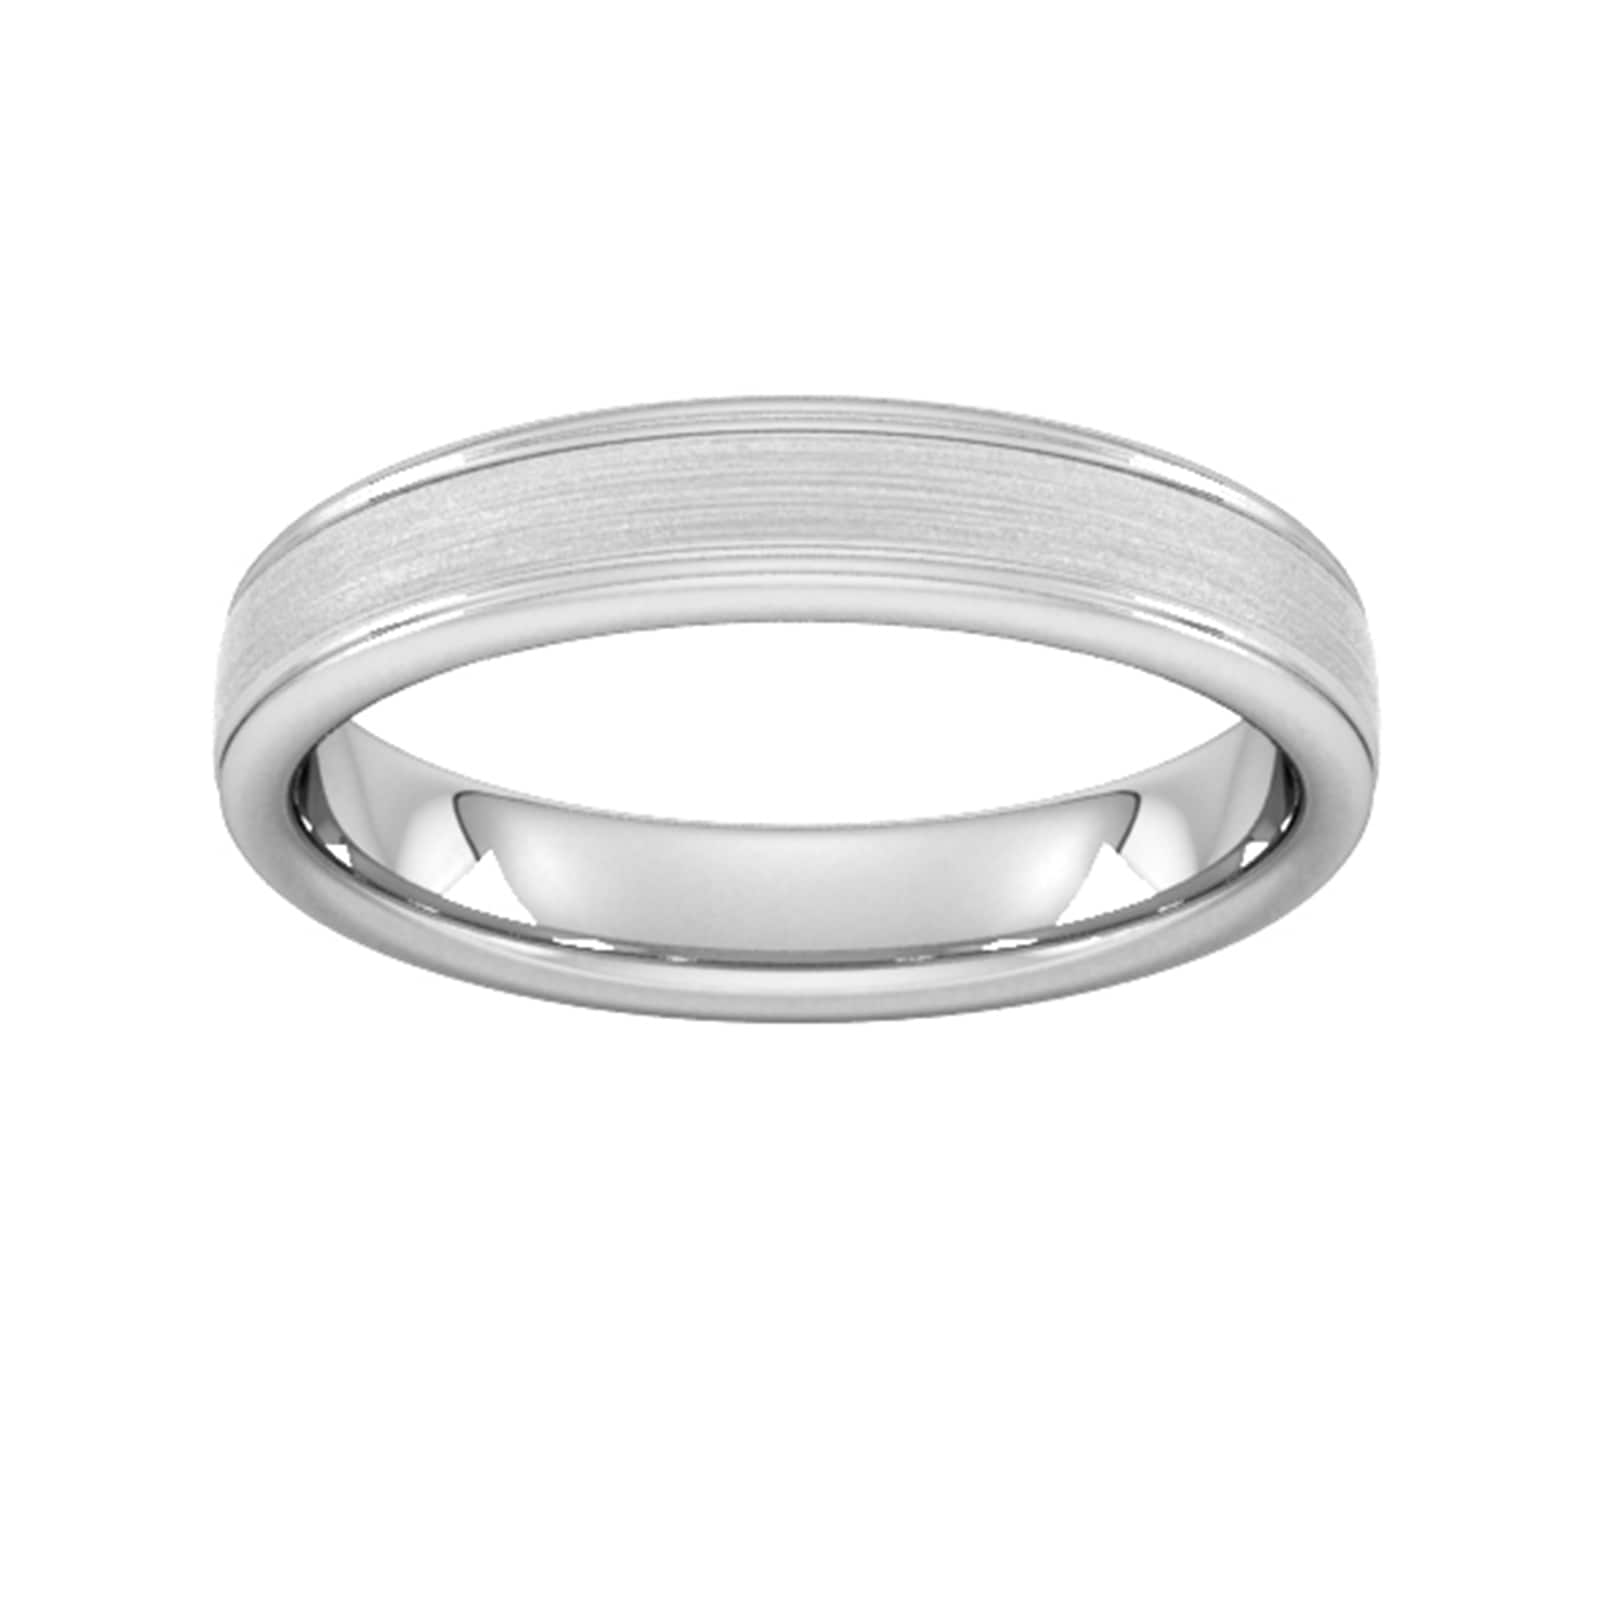 4mm Flat Court Heavy Matt Centre With Grooves Wedding Ring In 950 Palladium - Ring Size T